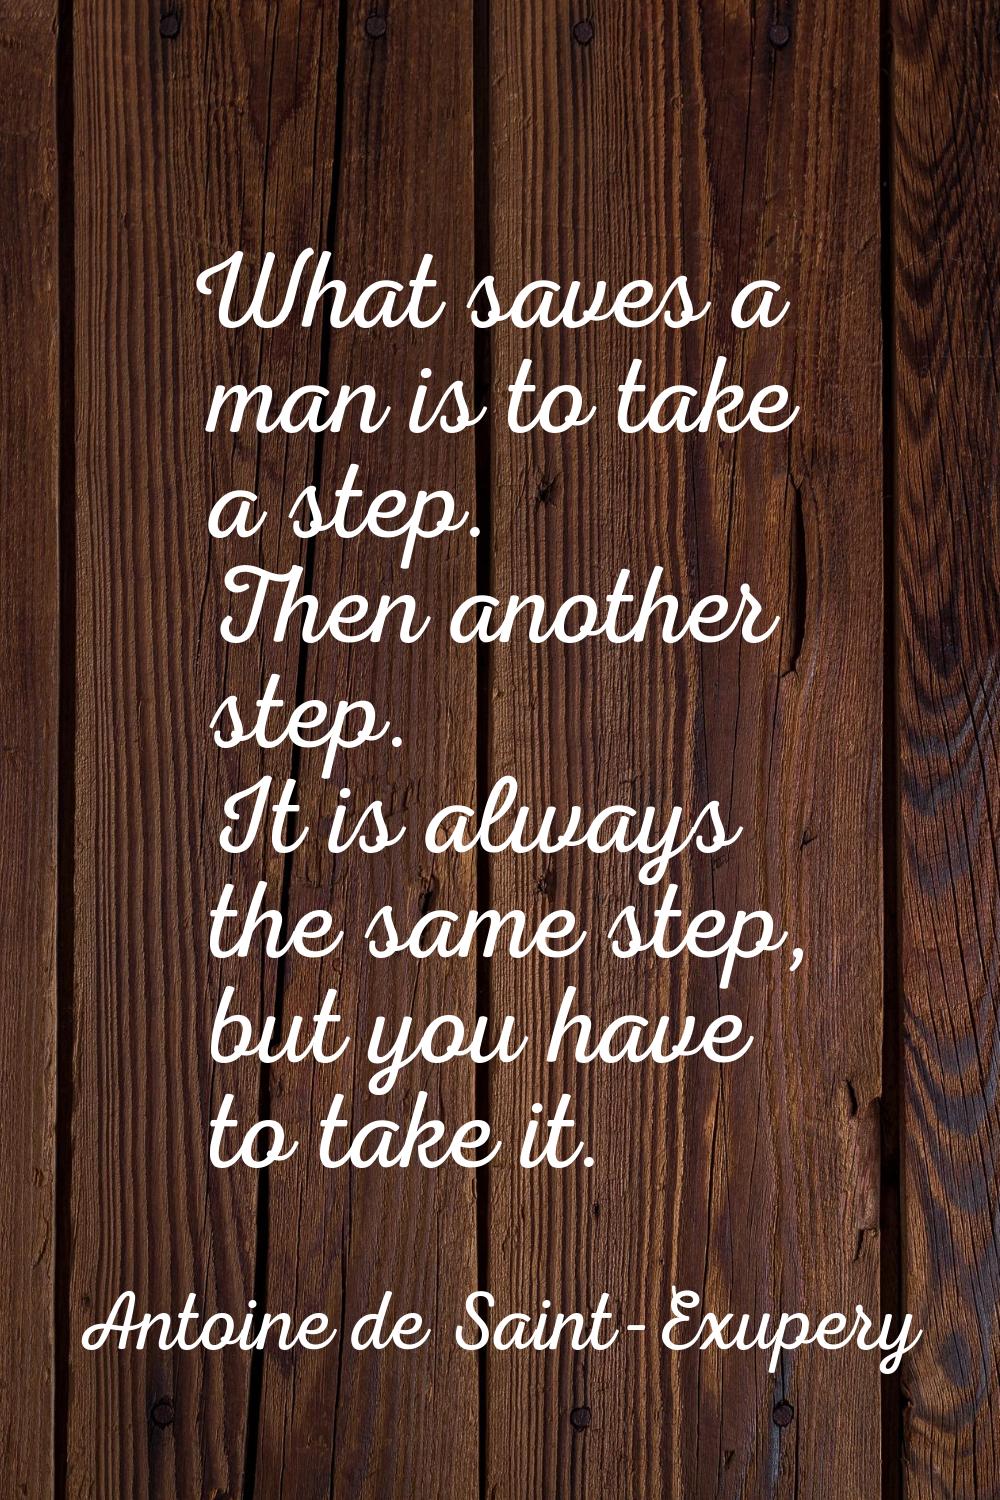 What saves a man is to take a step. Then another step. It is always the same step, but you have to 